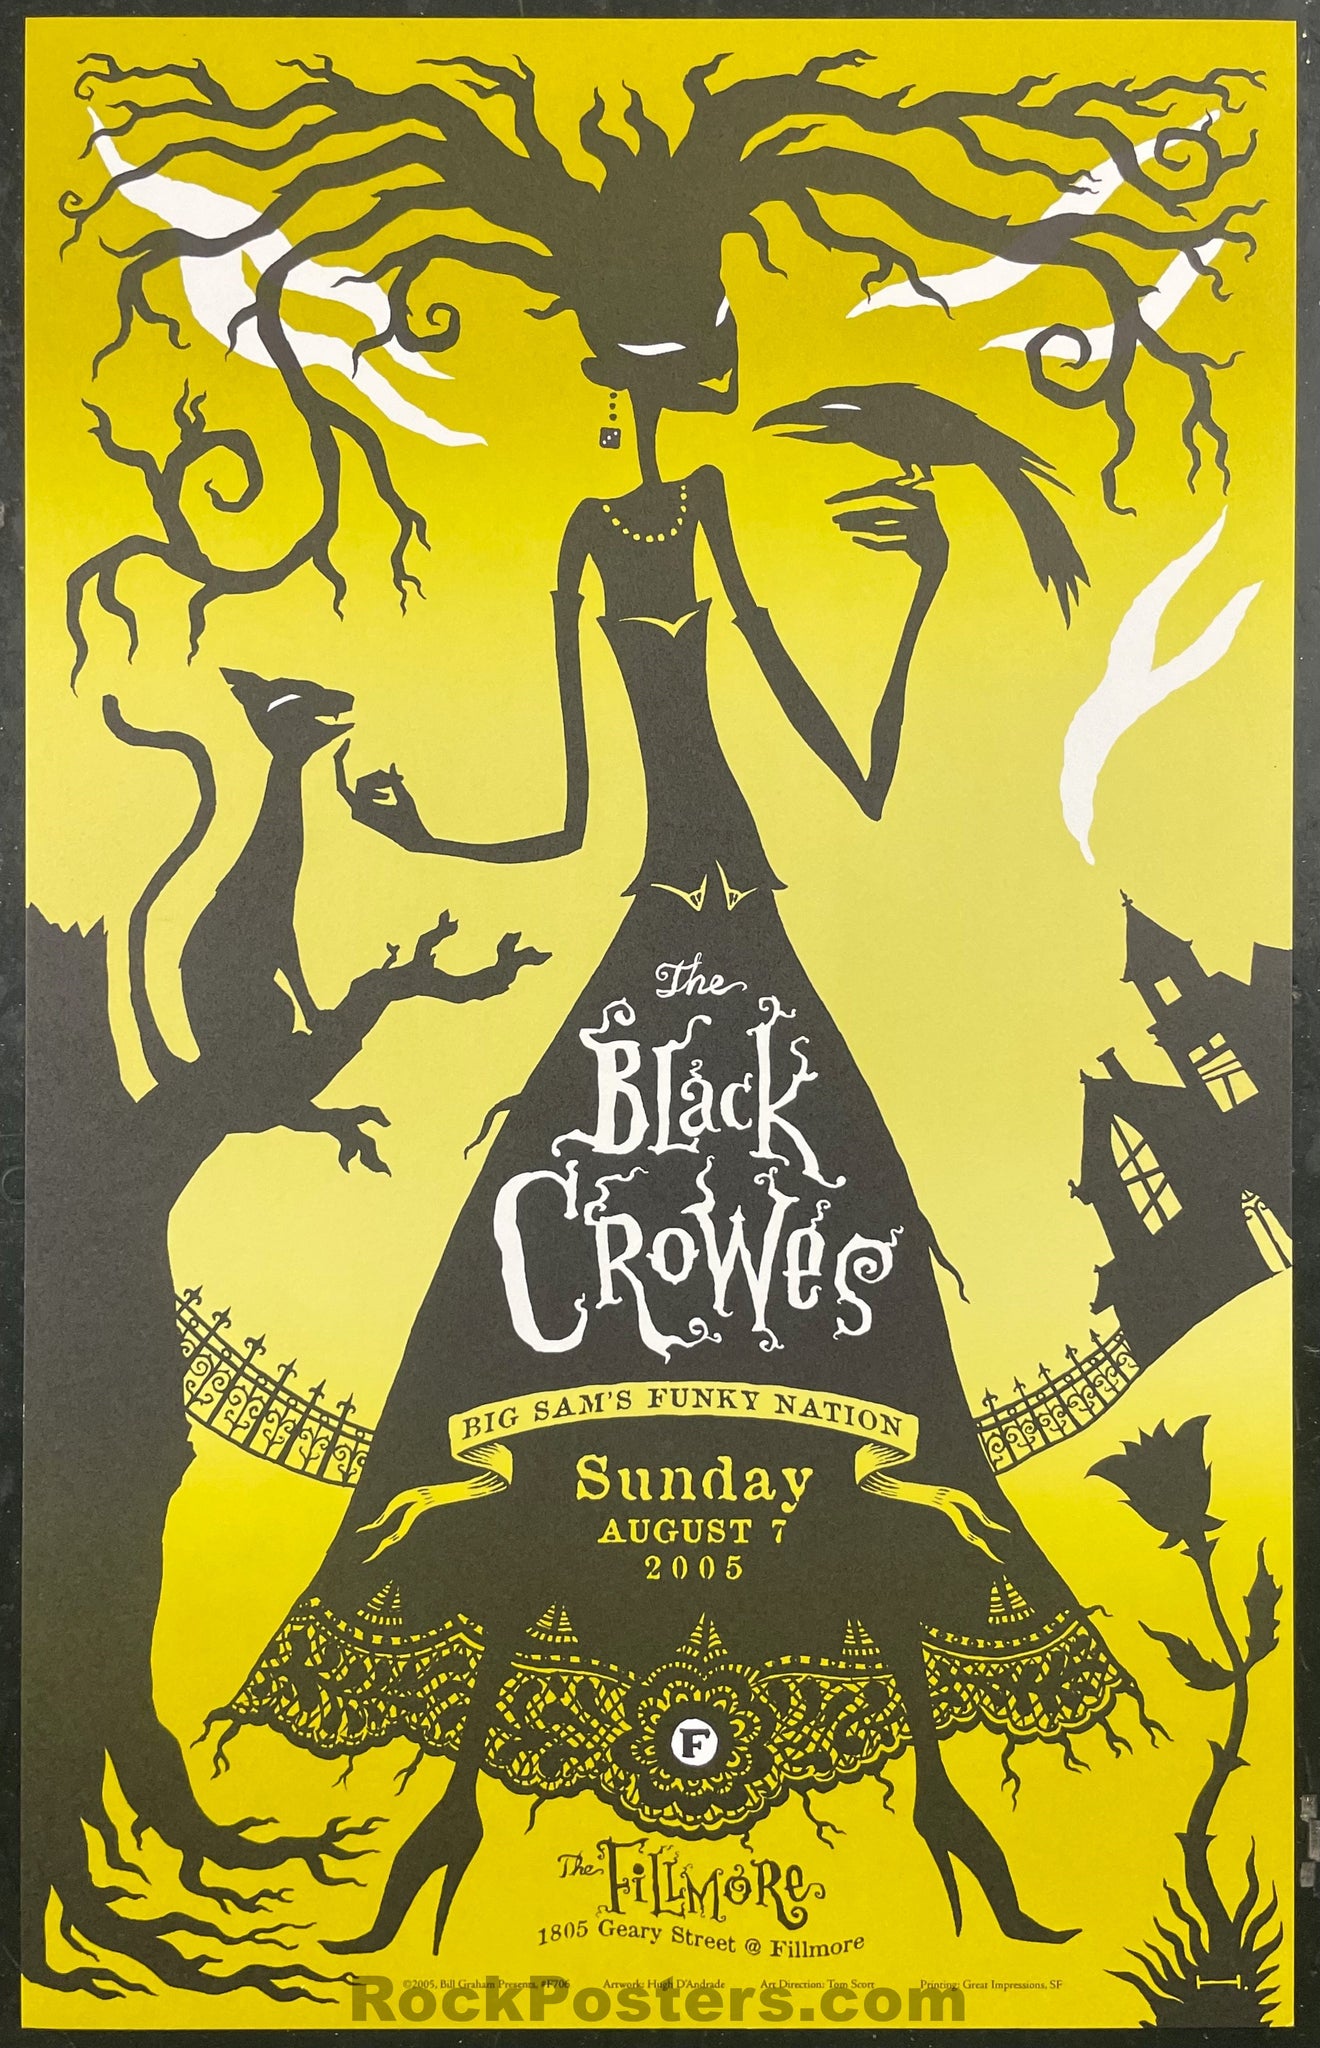 NF-706 - The Black Crowes - 2005 Poster - Fillmore Auditorium - Near M – SF  Rock Posters u0026 Collectibles